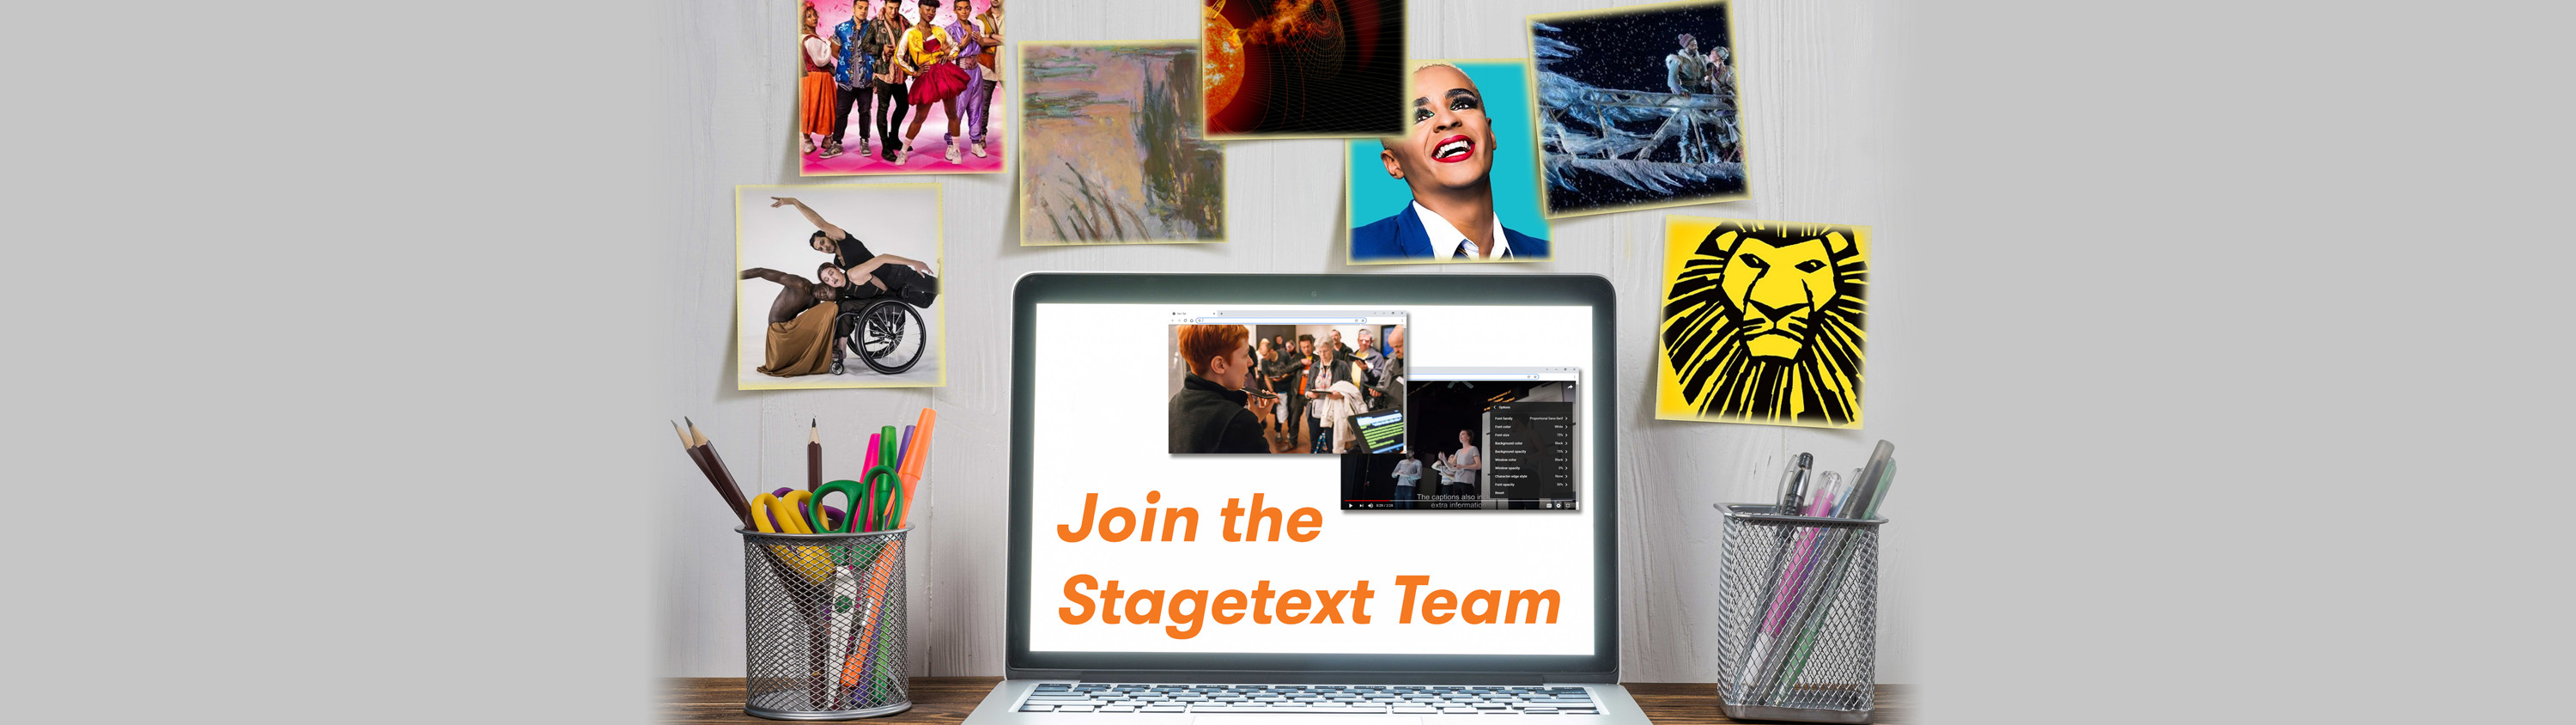 Working for Stagetext